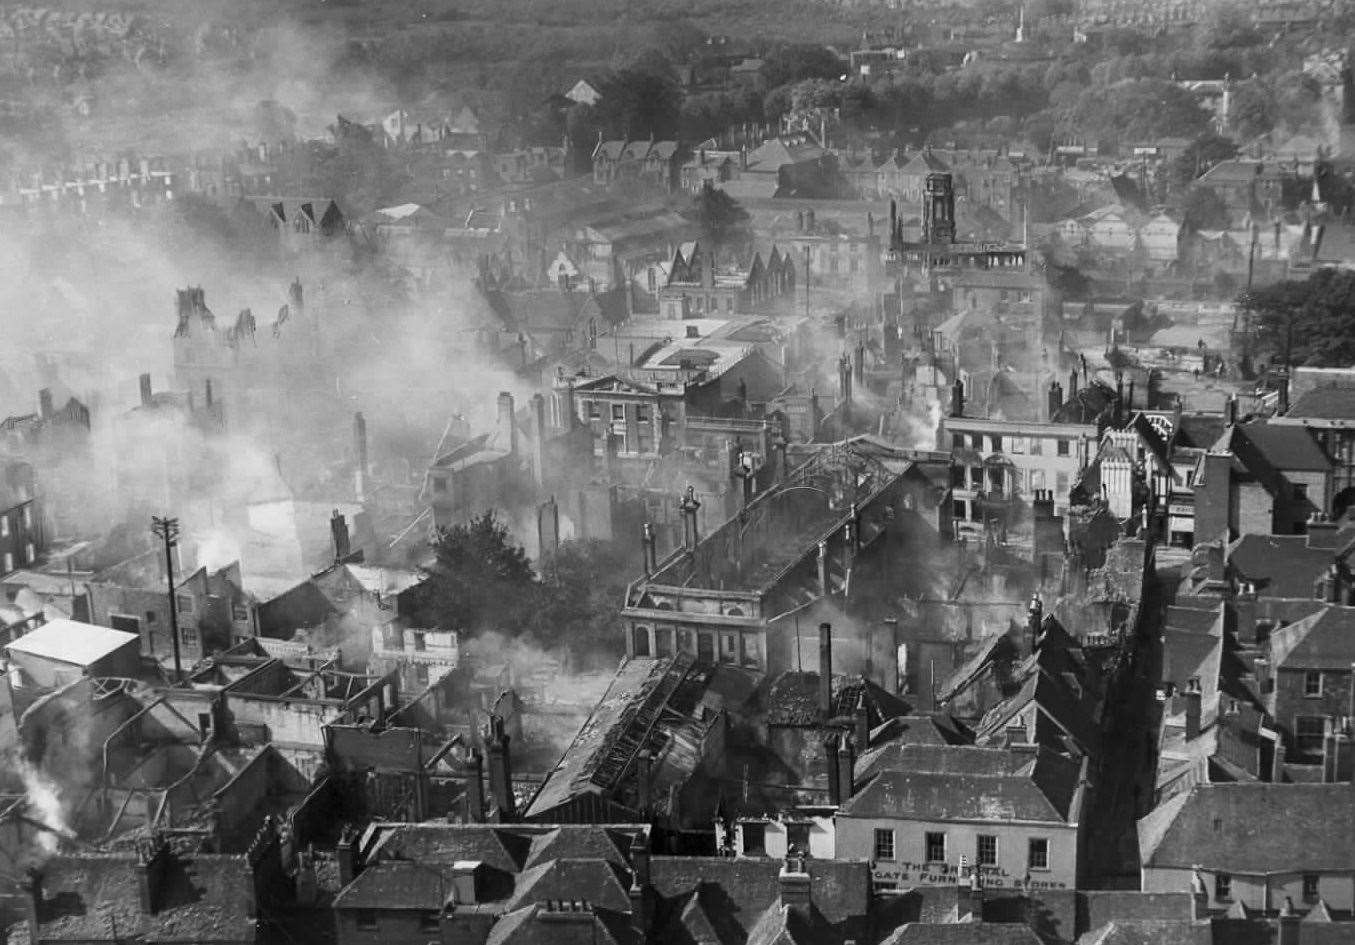 Many areas in the county were hit hard by German bombing raids - among them Canterbury